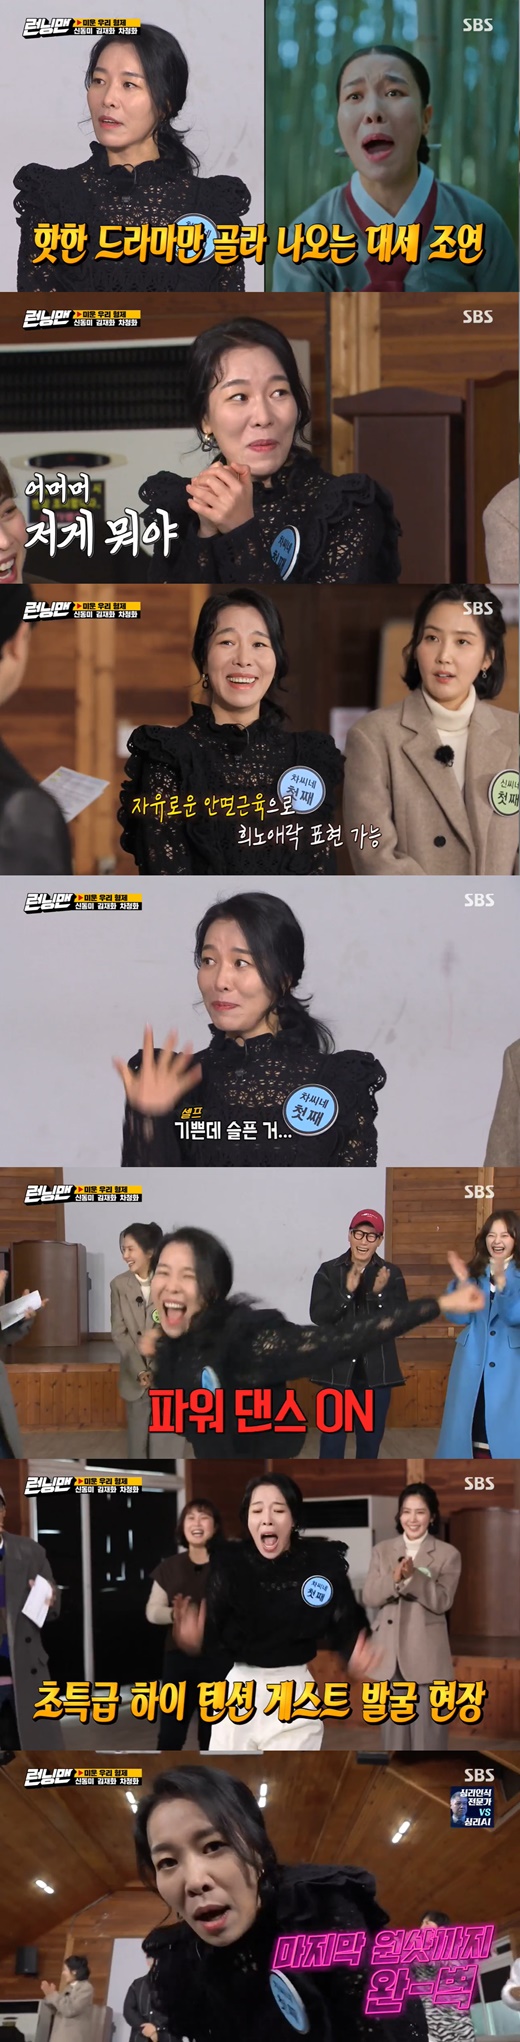 Actor Cha Chung-hwa announced the birth of a new entertainment character with an extraordinary tension.On SBS Running Man broadcasted on the 31st, Gacosan actress Cha Chung-hwa X Shin Dong-mi X Kim Jae-hwa appeared and showed a unique entertainment feeling.Among them, Zheng He, a new face that was rarely seen in the entertainment program, attracted attention.He appeared in the drama The Unstoppable of Love and The Iron Queen, and he showed his face. He admired all of the members of Running Man by emitting the hidden entertainment and explosive talent.Cha Zheng He has been different since his introduction: as soon as he appeared, he played Lee Kwang-soos Happy and Sad Face straight away.It was a sudden spell, but everyone admired his acting ability to express various emotions at once.Cha Chung-hwa said, I will try it with my expression because I can not dance well. He showed Rain and Park Jin-youngs Lets change to me dance.He showed off his rich facial expressions and passionate dance skills. The high-quality dancers overwhelmed the crowd.Yang Se-chan praised Cha Chung-hwa dance and praised him for I think I would have met as a comedian senior if it wasnt an actor, while Jeon So-min said, My heart is running.I will be a fan of you. In the full-scale race, Cha Chung-hwas unstoppable and hot entertainment glowed.He betrayed the members of Running Man and played psychological warfare, and occupied Race with unstoppable struggle and gesture.Cha Chung-hwa also met Song Ji-hyo and said, I write a fact that you advertise.MBC What do you do when you play?Yoo Jae-Suk is looking for a new entertainment character to break down into a Canola Yo.Canola Yoos coveted War for talent was born in Running Man